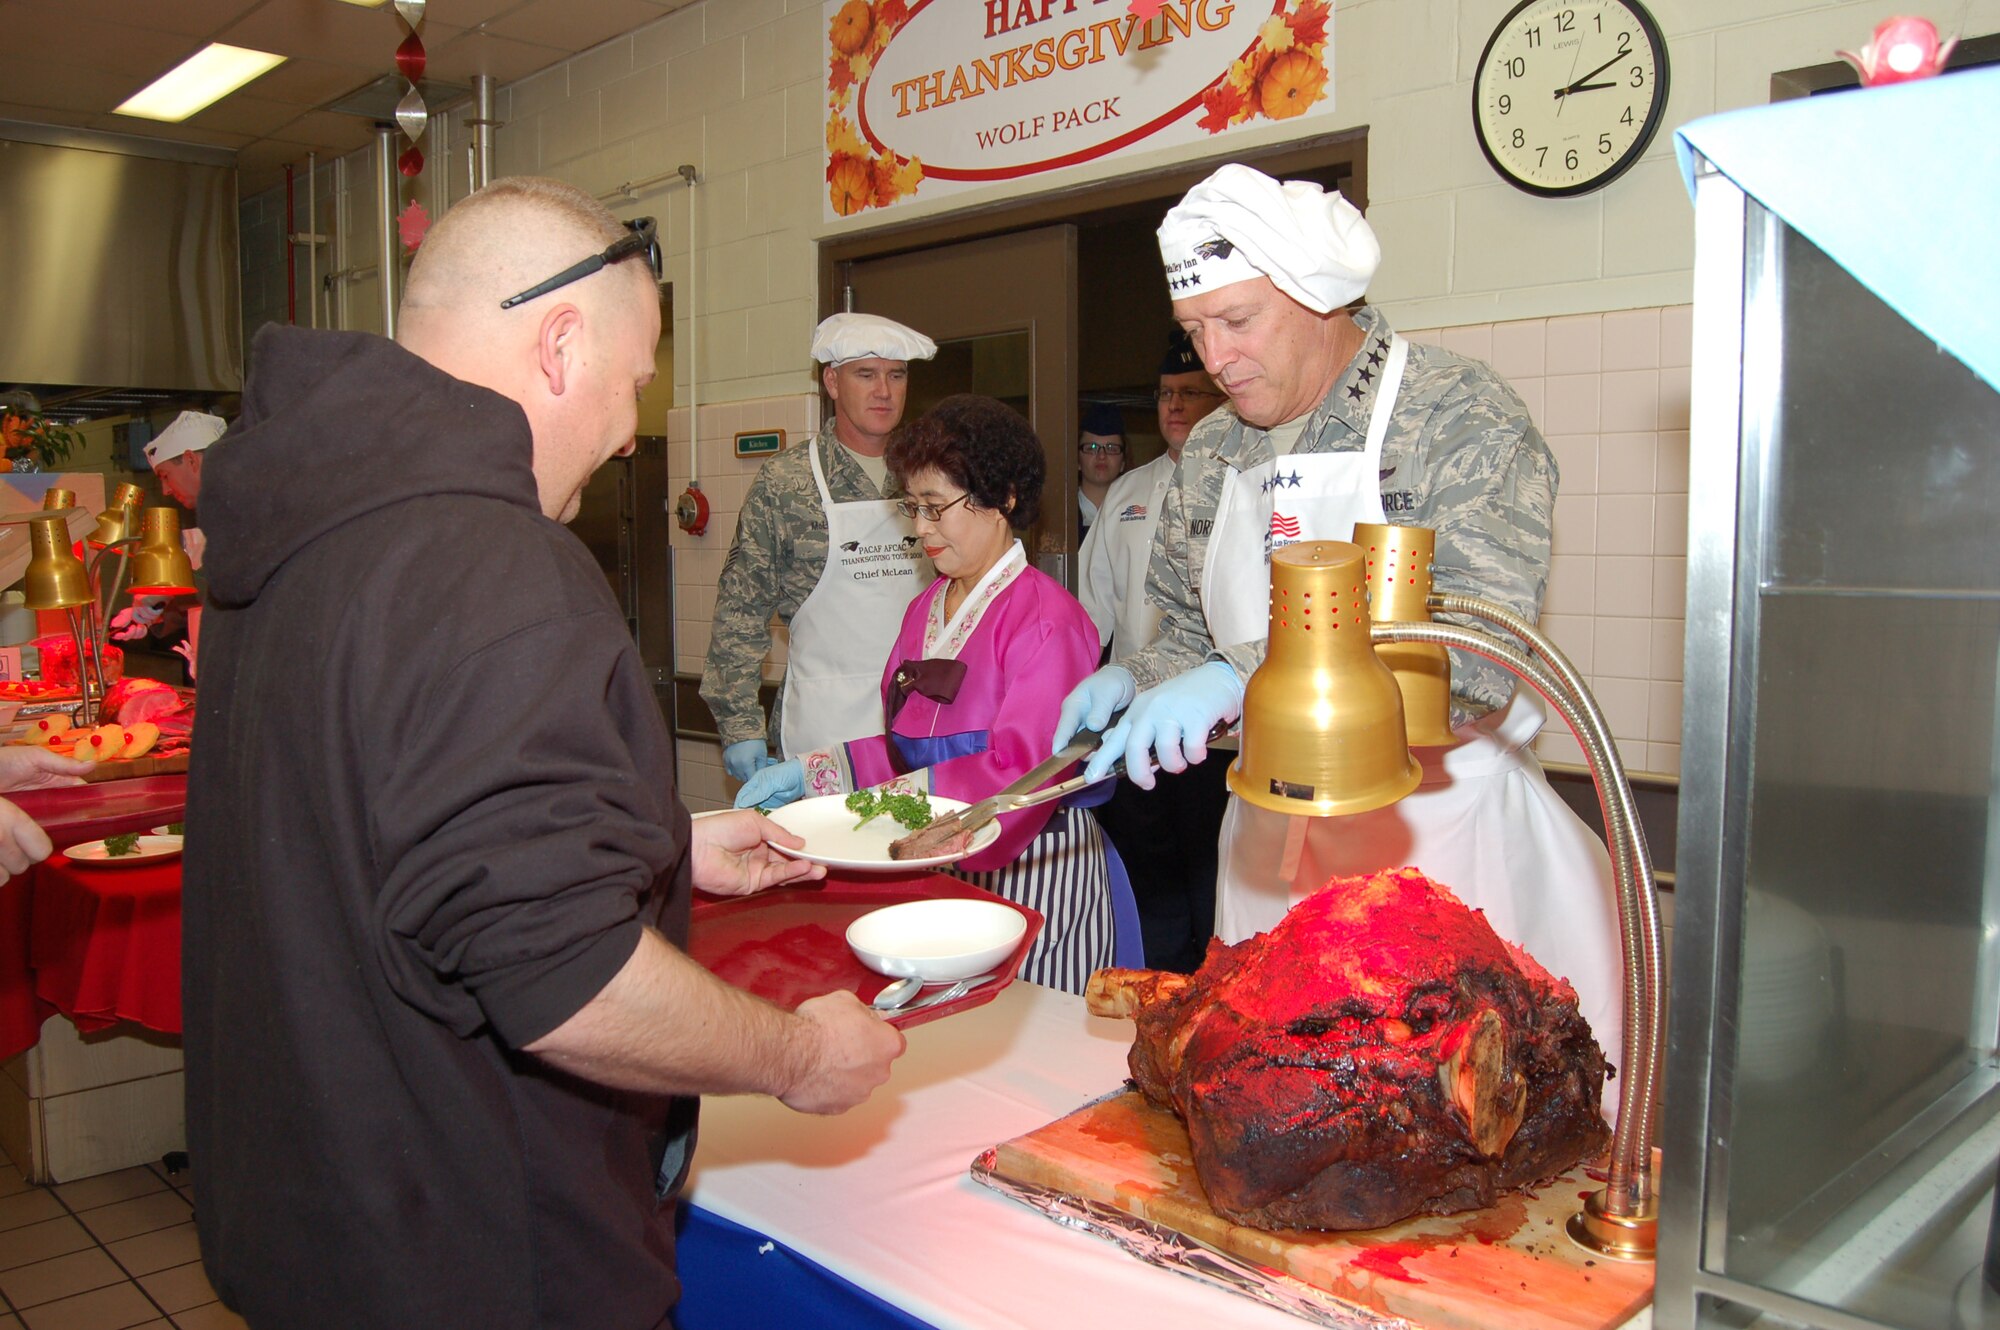 KUNSAN AIR BASE, Republic of Korea—Tech Sgt. Richard Brown of the 8th Security Forces Squadron receives his Thanksgiving dinner from Gen. Gary North, Pacific Air Forces commander, at the O’Malley Dining Facility here 26 November.  Gen. North visited Kunsan with senior leaders from PACAF and the 7th Air Force and members of the PACAF Civilian Advisory Council to help serve the holiday meal and dine with Wolf Pack members. (U.S. Air Force photo/Master Sgt. Anna Hayman)